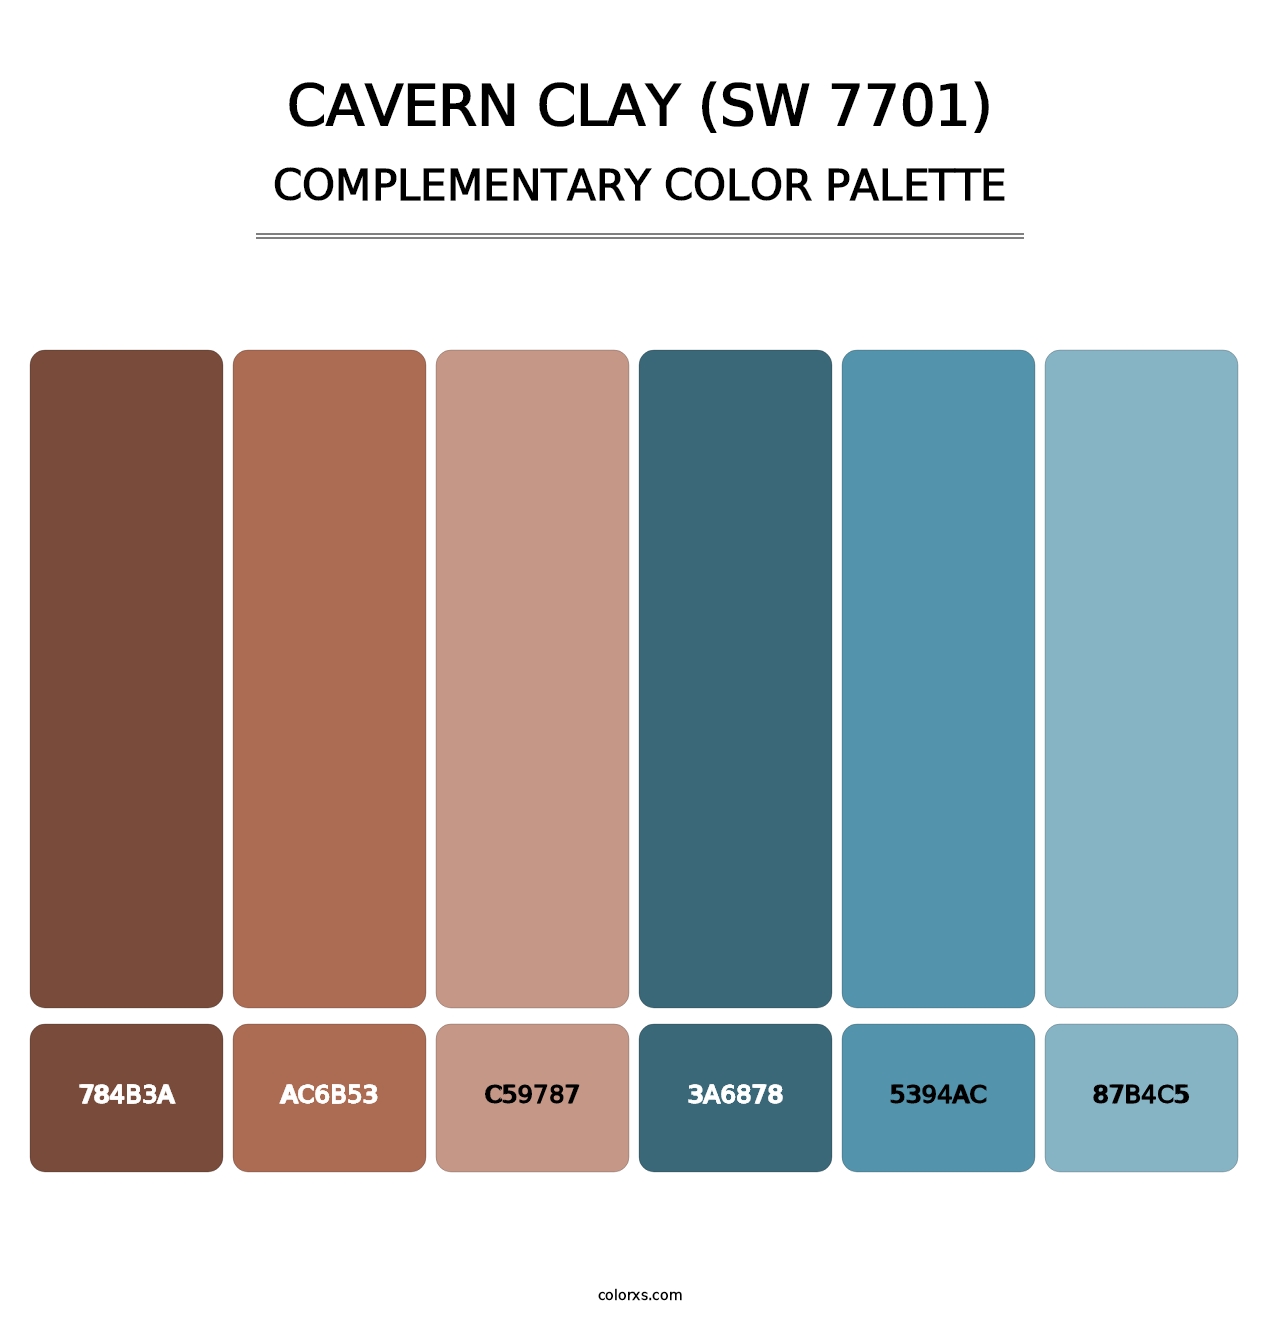 Cavern Clay (SW 7701) - Complementary Color Palette